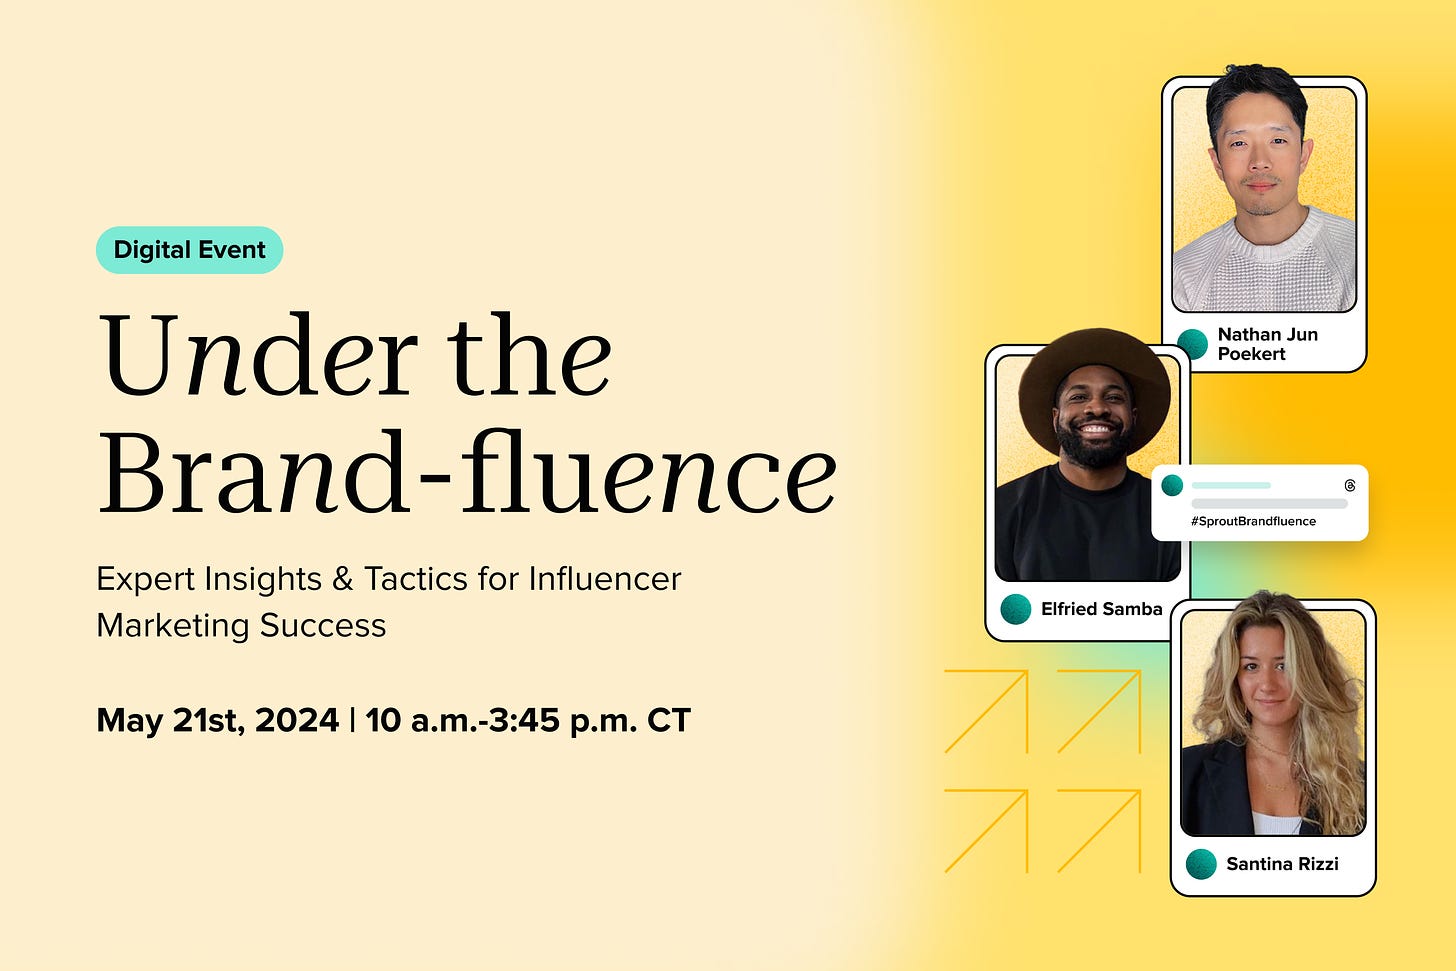 Banner for an event called "Under the Brand-fluence" that's on May 21st at 10am CT